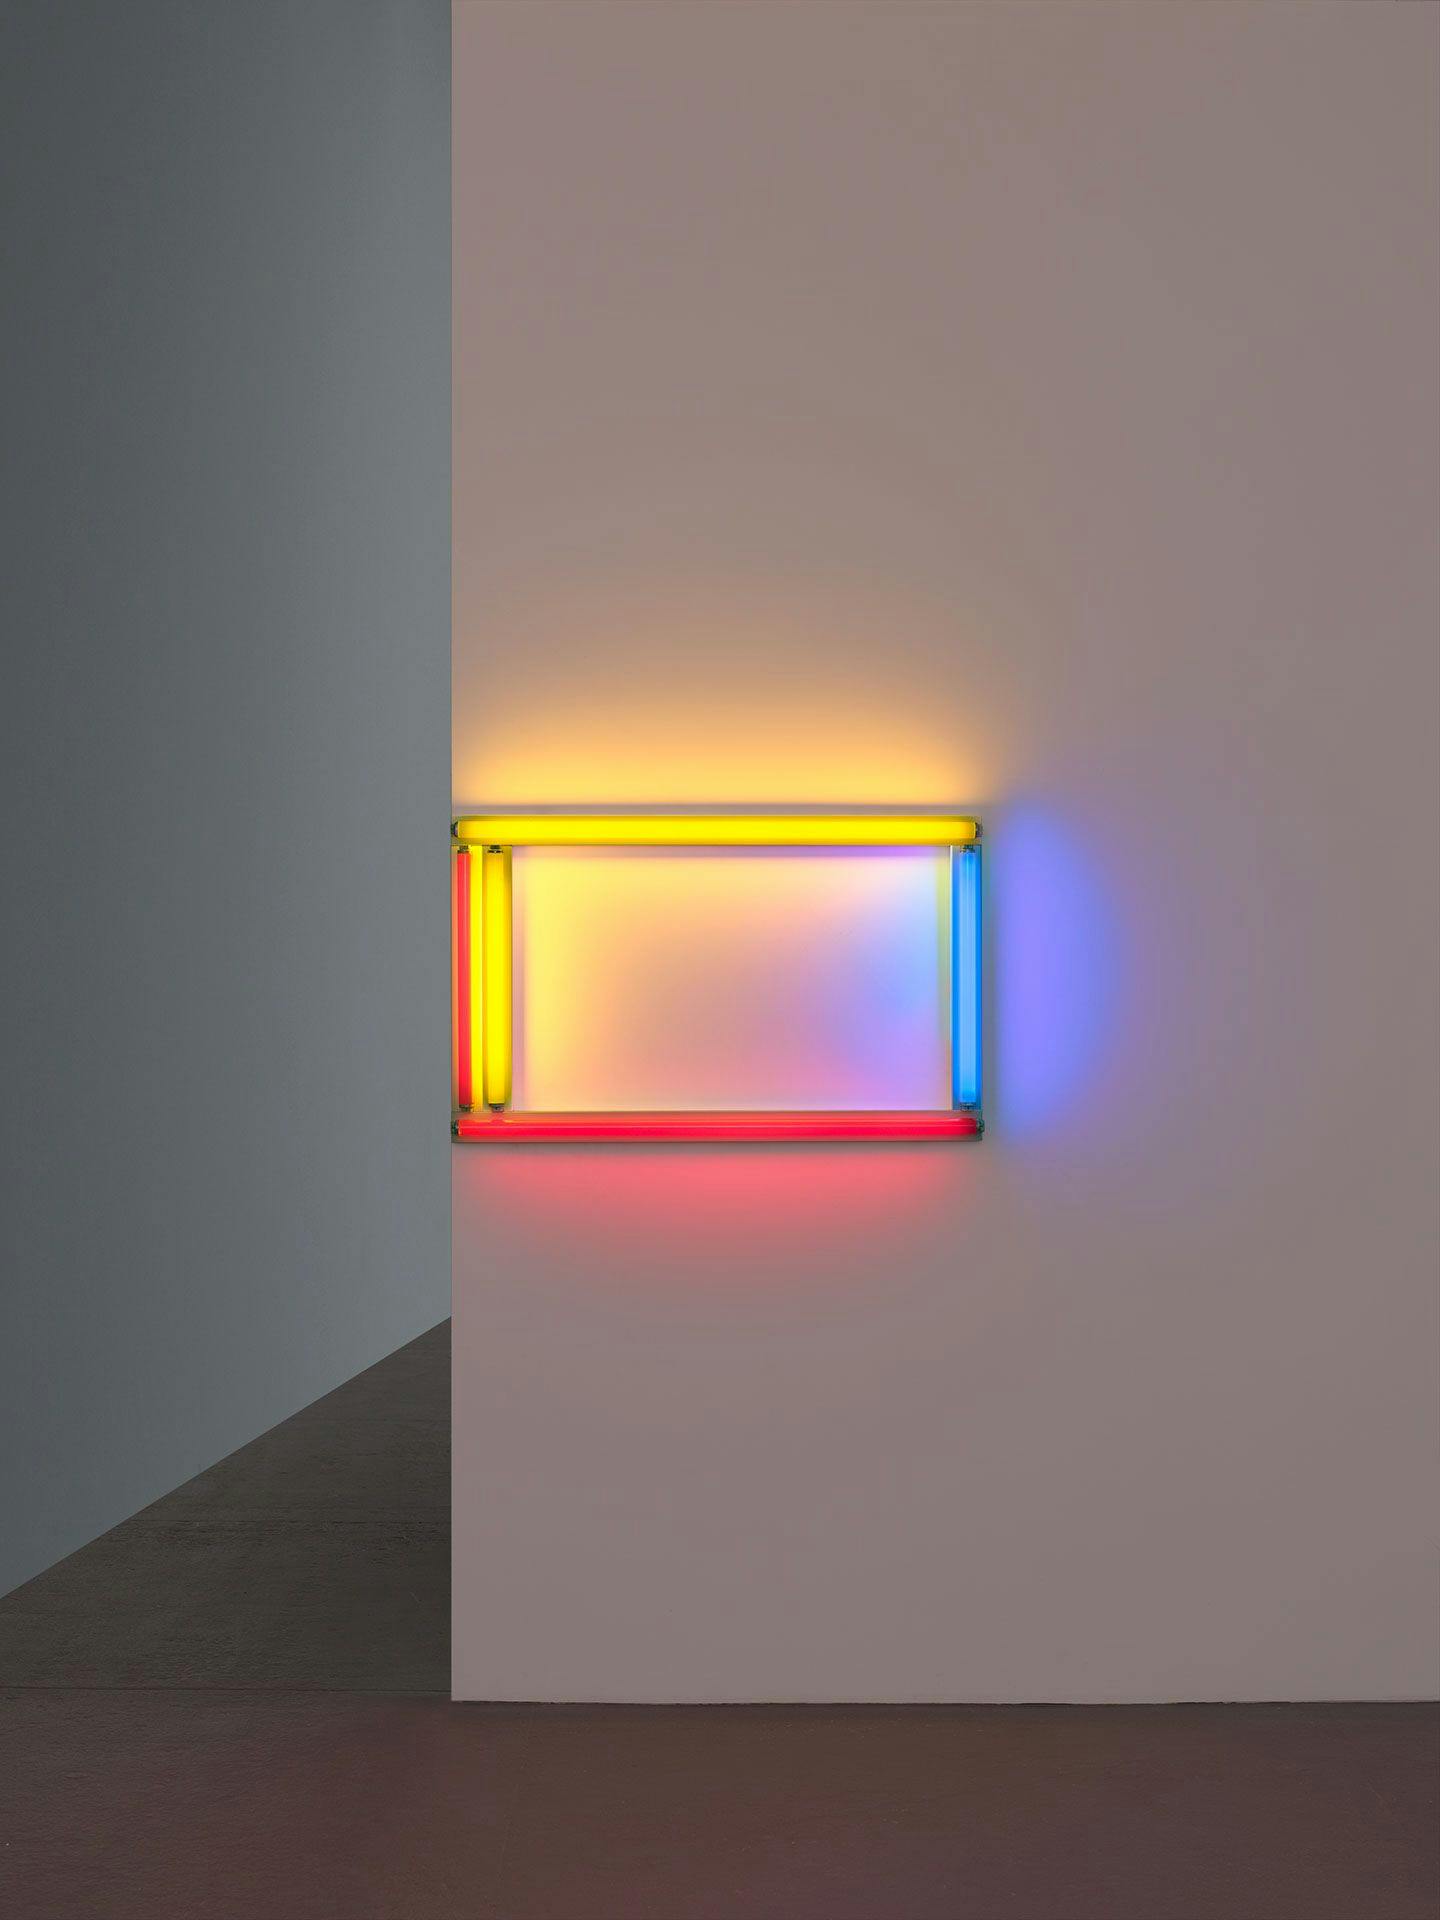 A sculpture in red, yellow, and blue fluorescent light by Dan Flavin, titled a primary picture, dated 1964.